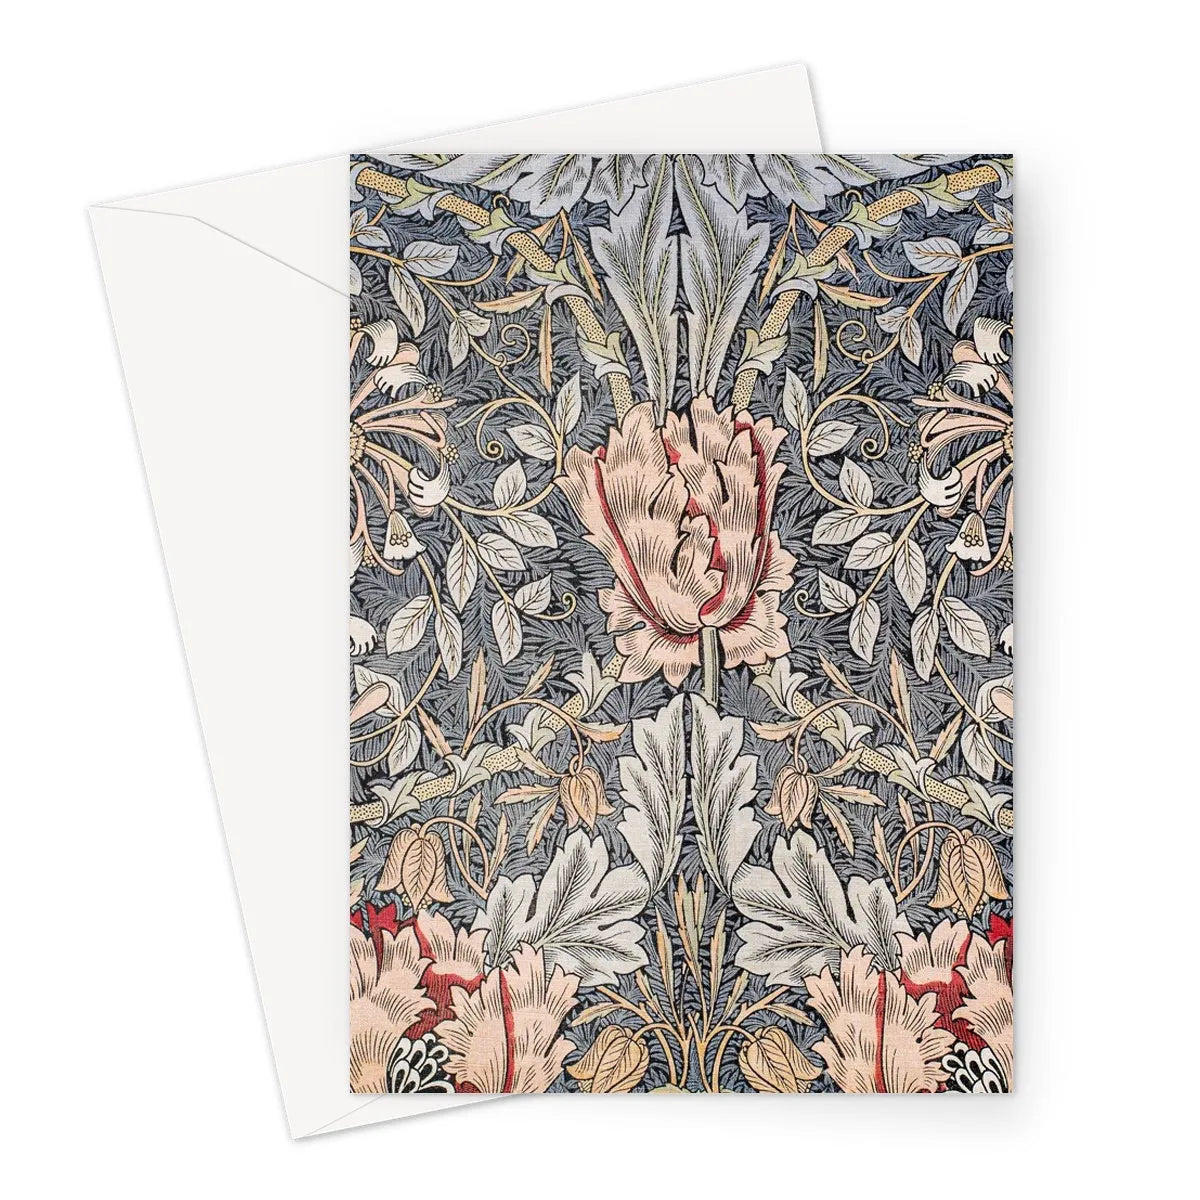 Honeysuckle By William Morris Greeting Card - A5 Portrait / 1 Card - Greeting & Note Cards - Aesthetic Art